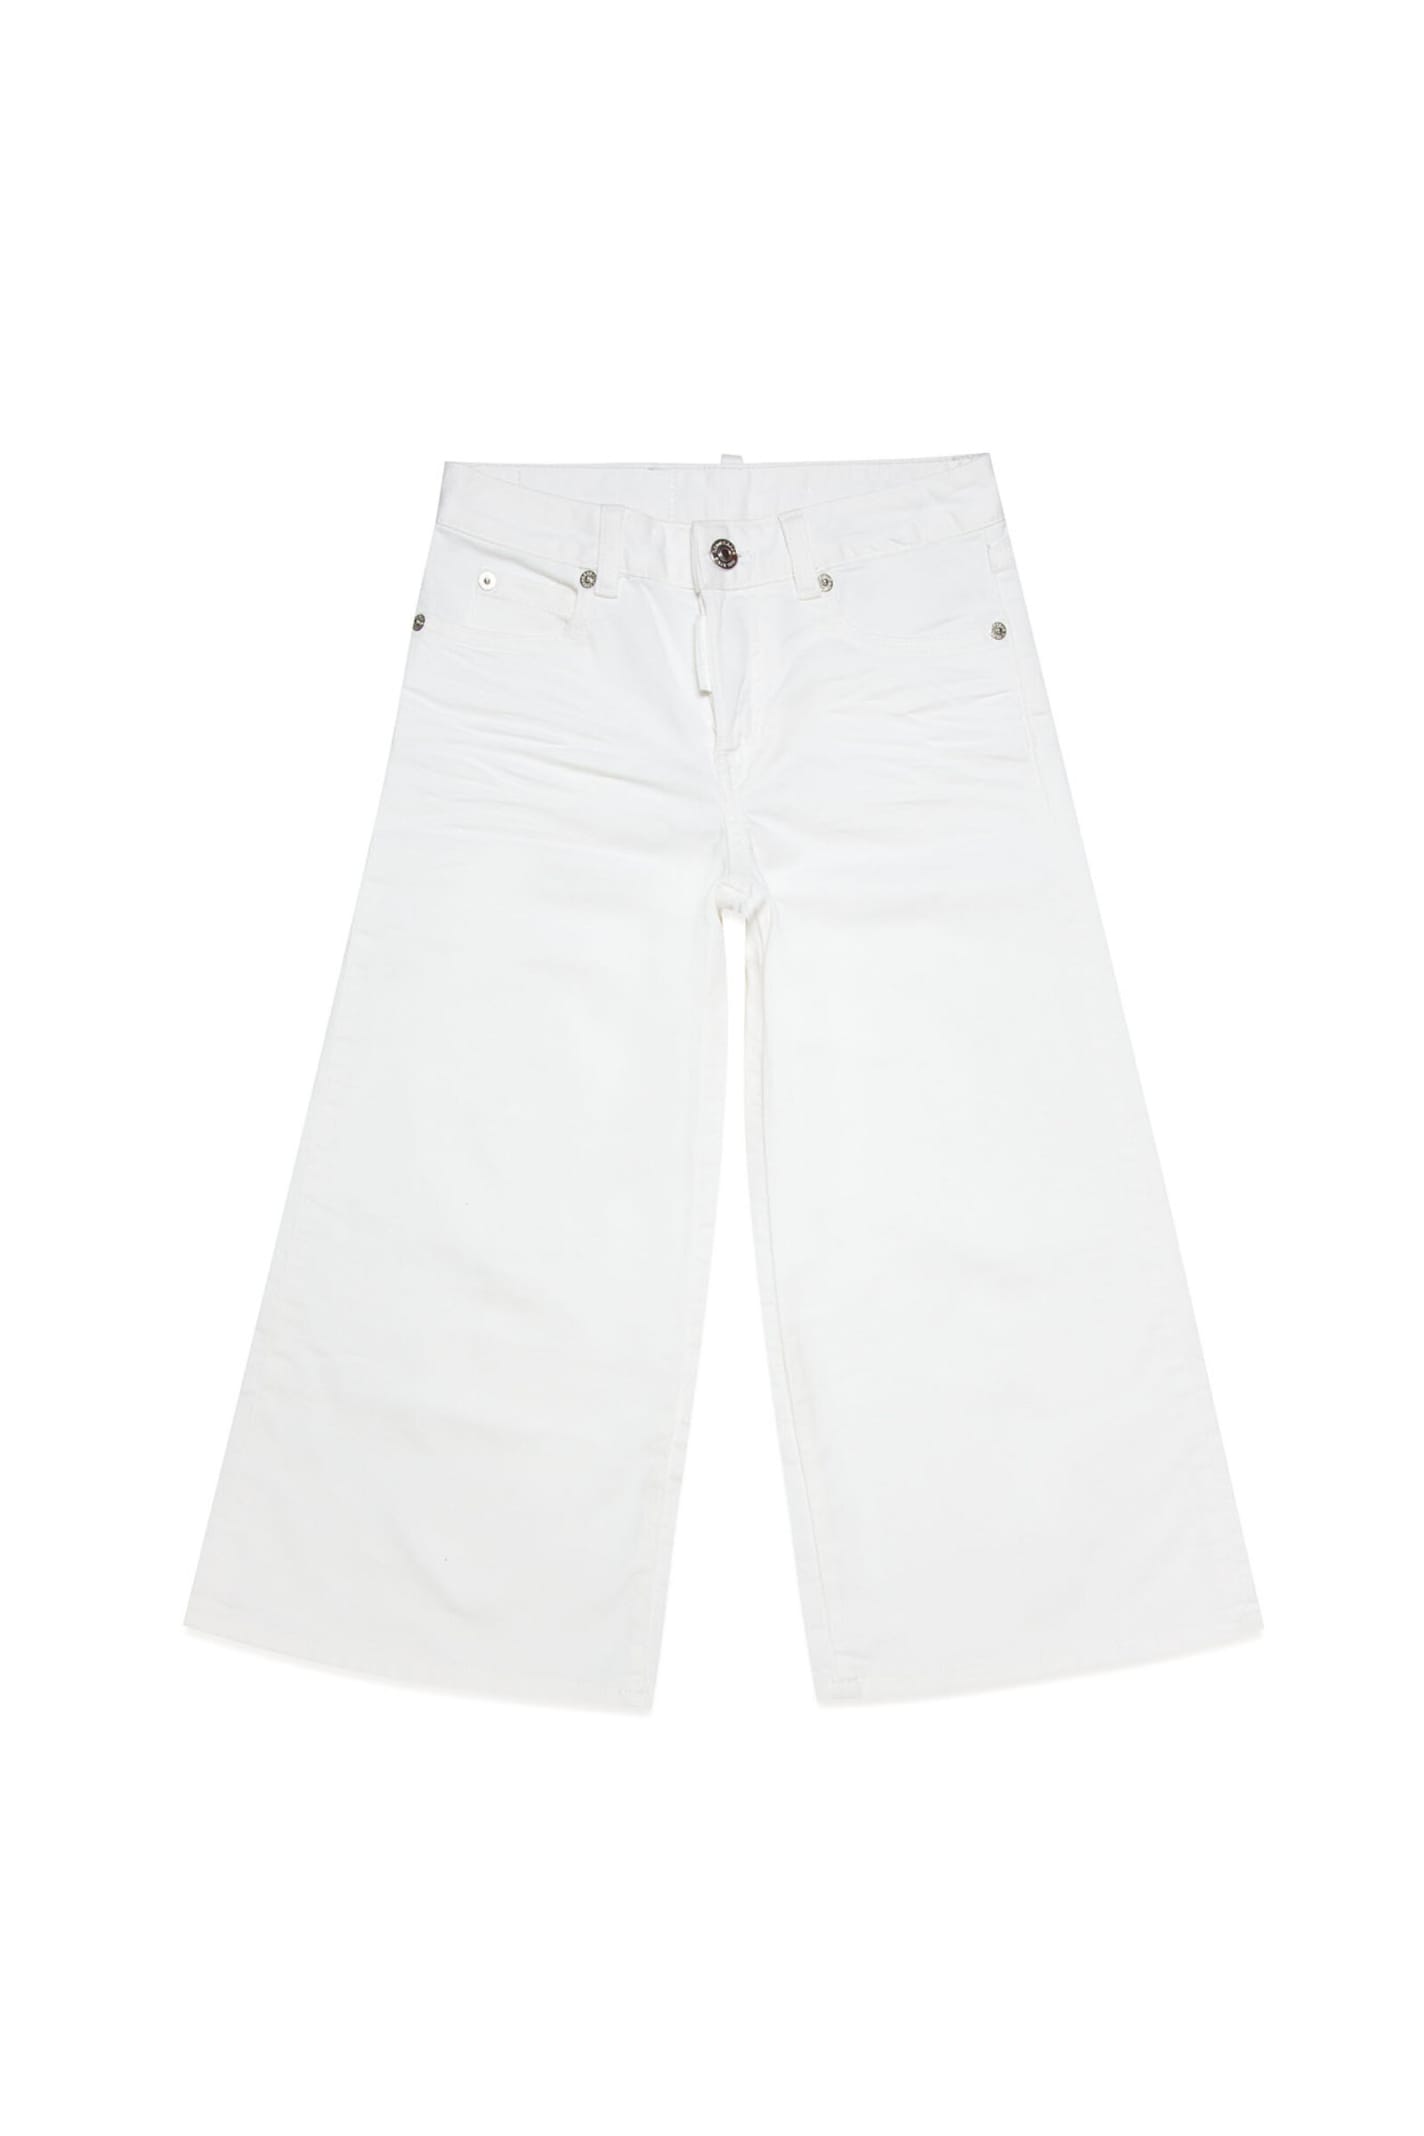 Dsquared2 D2p378f Medium Waist Page Jean-eco Trousers Dsquared Jeans Page Palazzo White